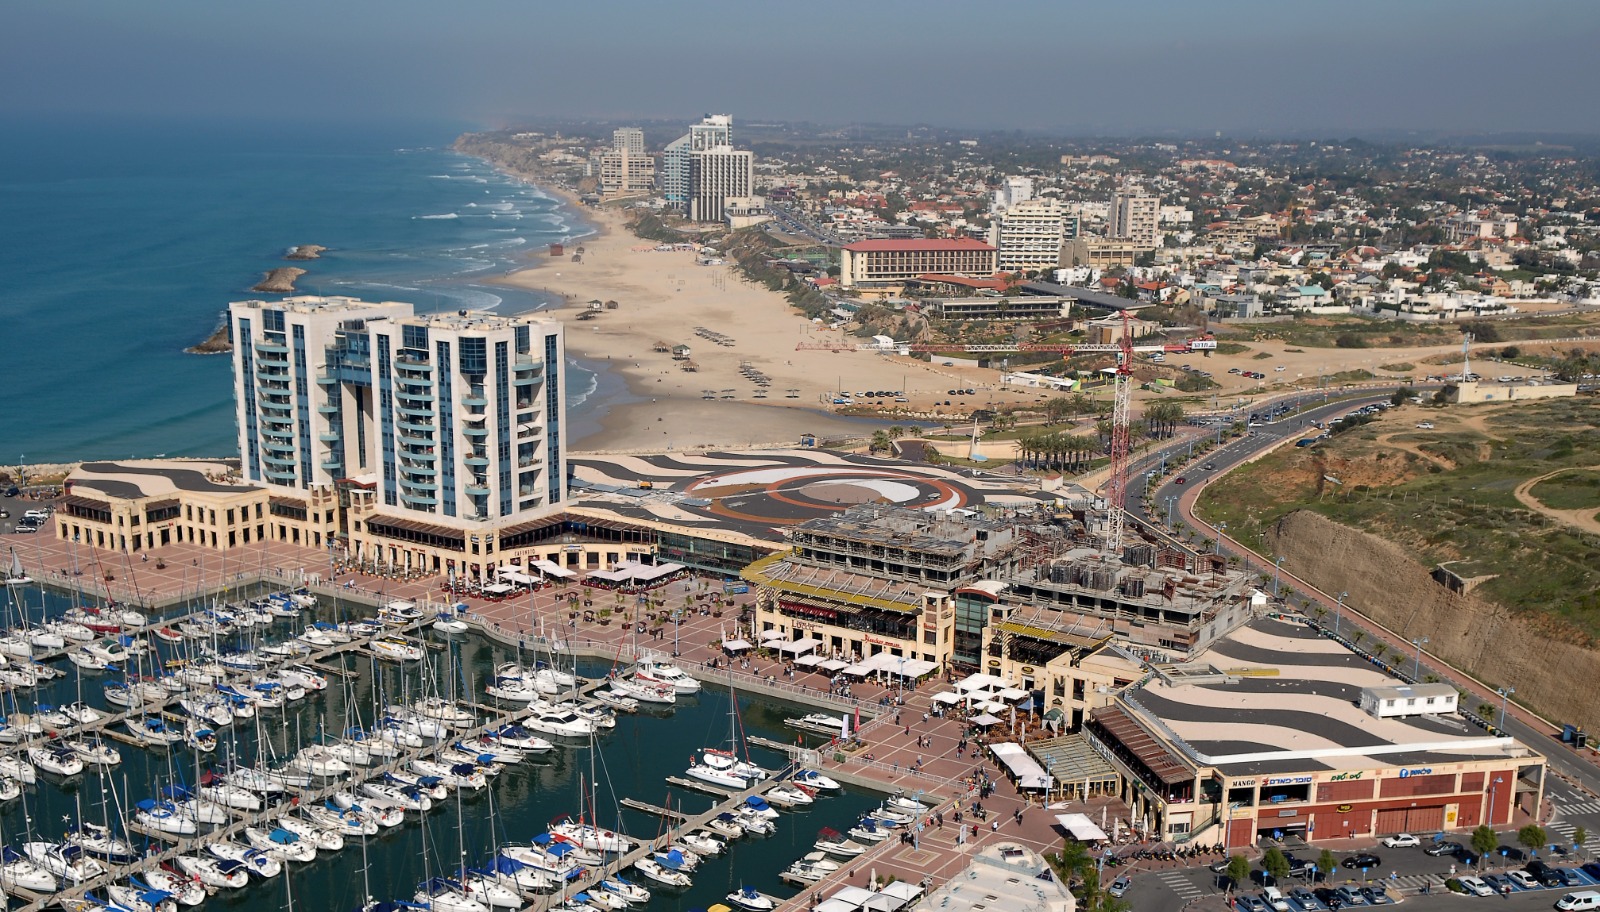 Arena: The complex is located in the Marina area, adjacent to the beach, hotels, and pier in west Herzliya | Reality the Leading Group of Real Estate Investment Funds in Israel